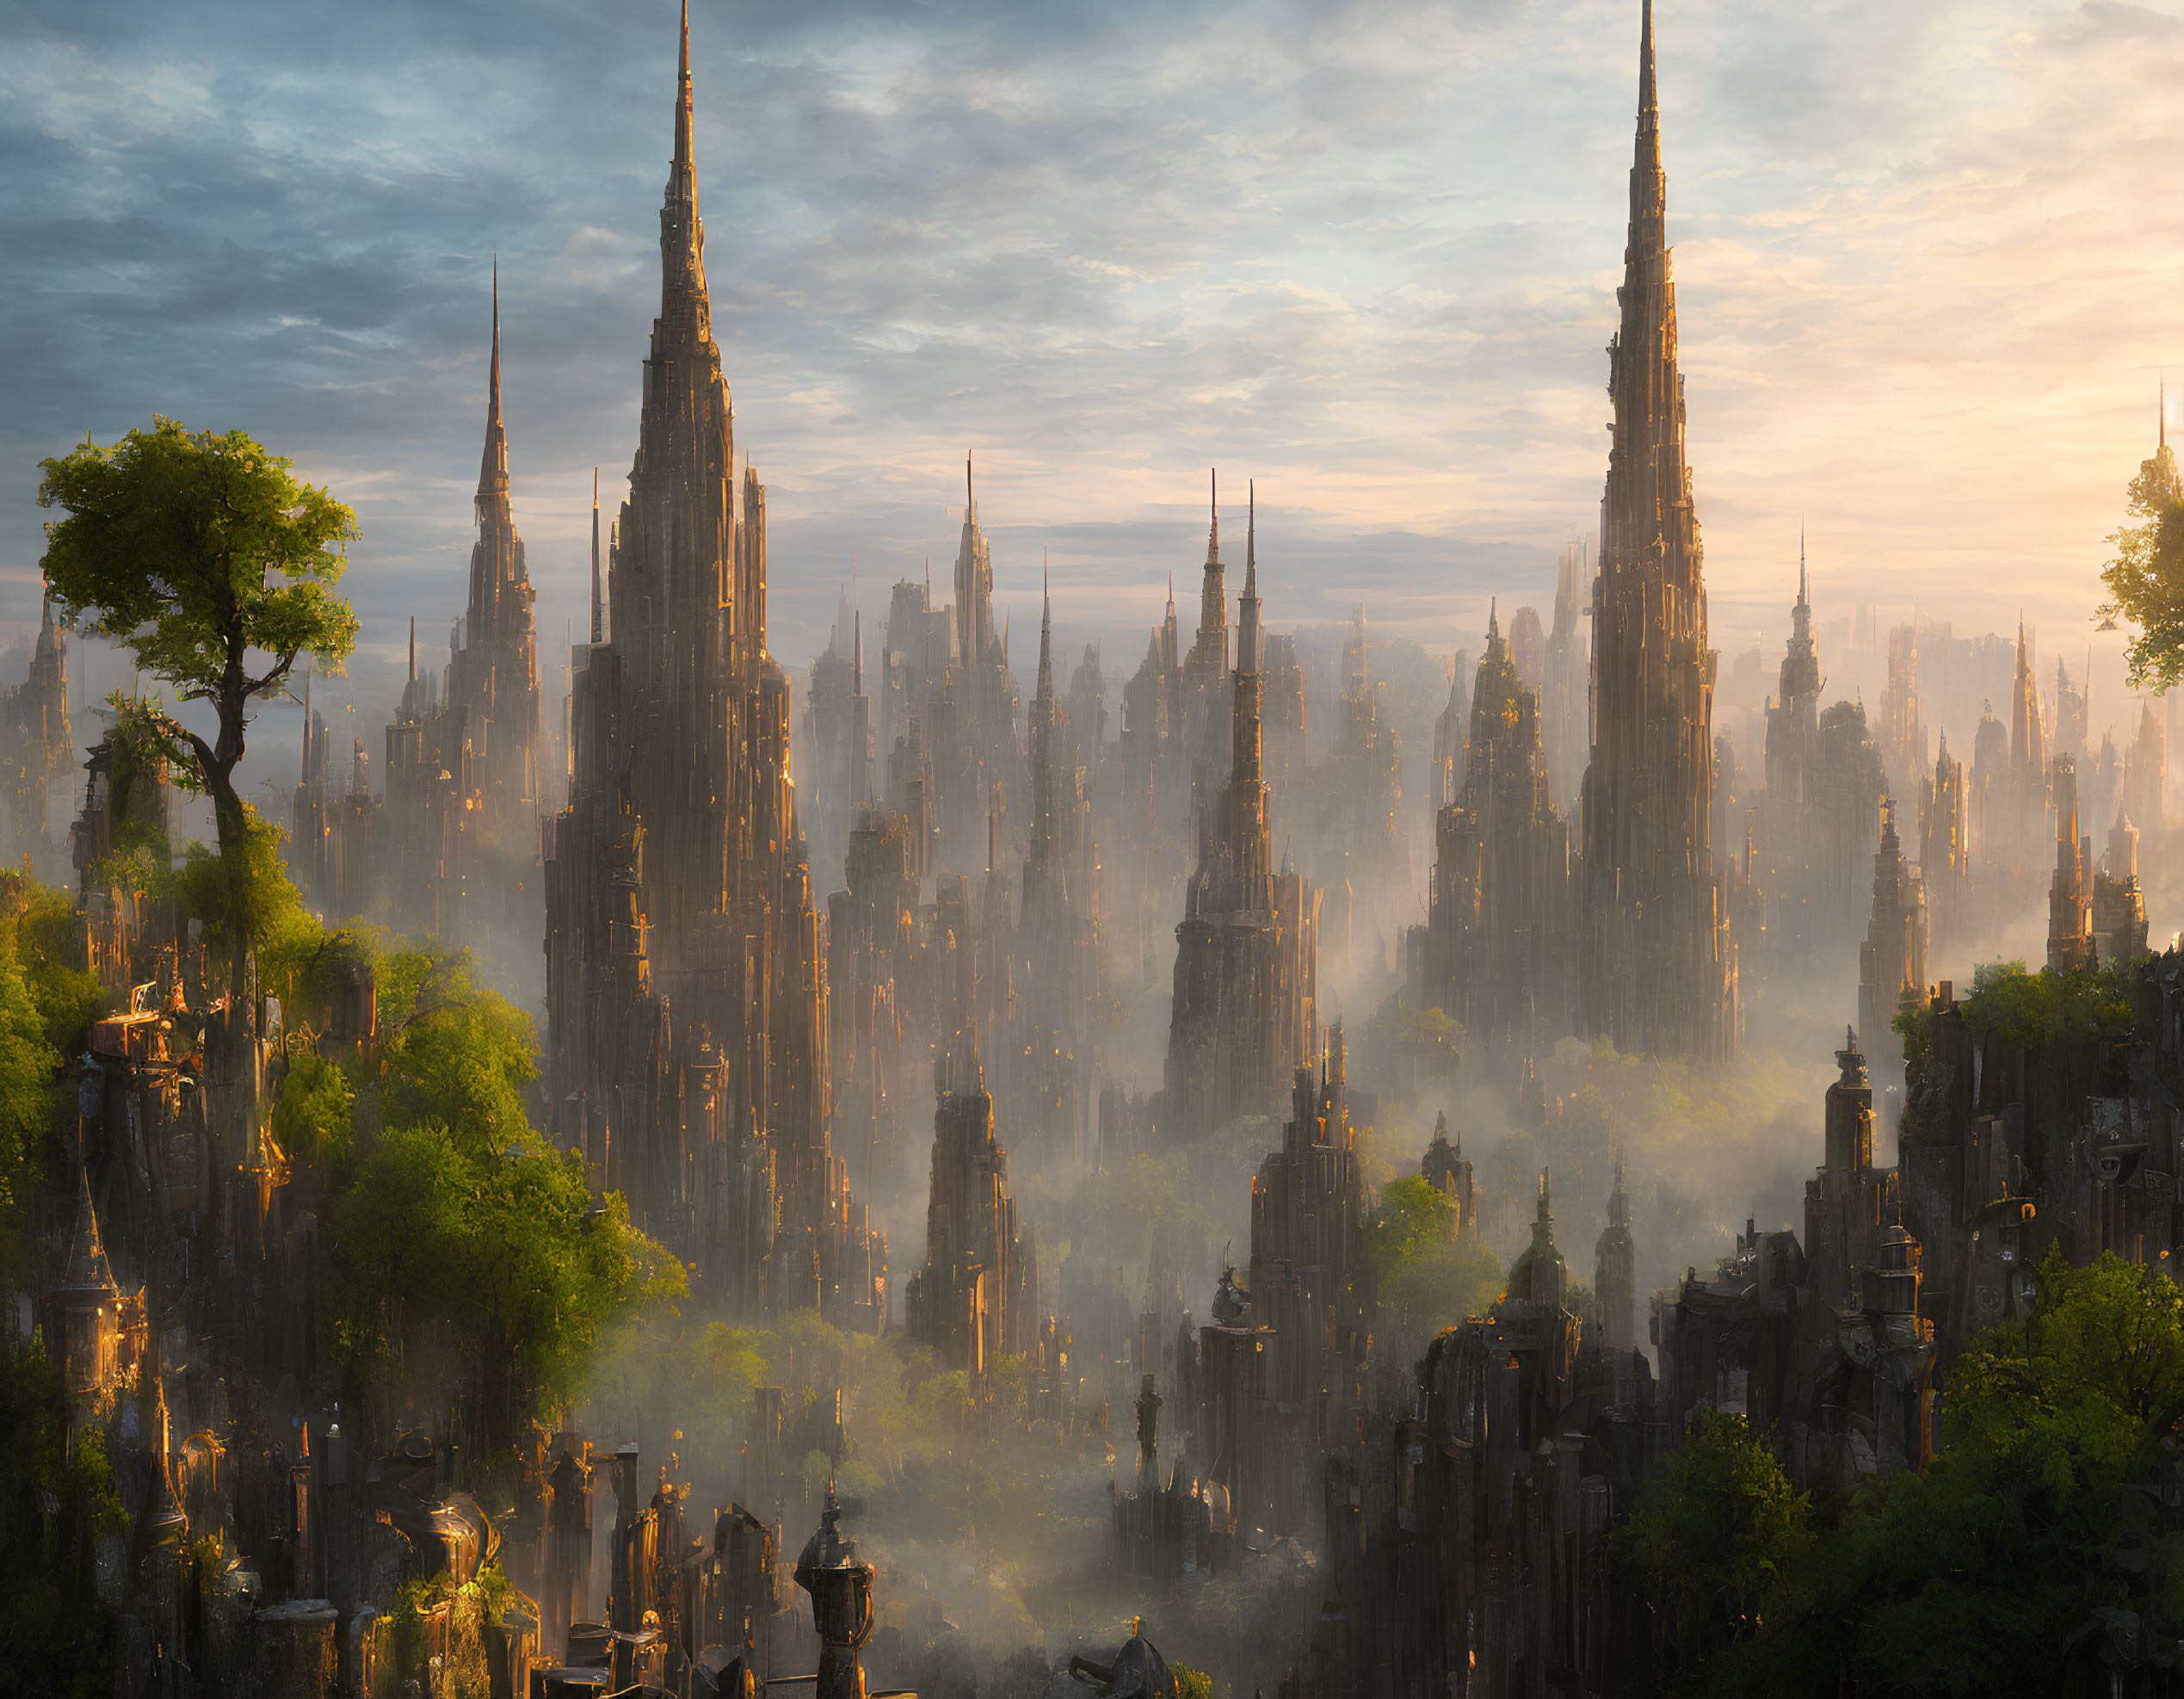 Ethereal cityscape with golden light, towering spires, verdant foliage, and floating mist